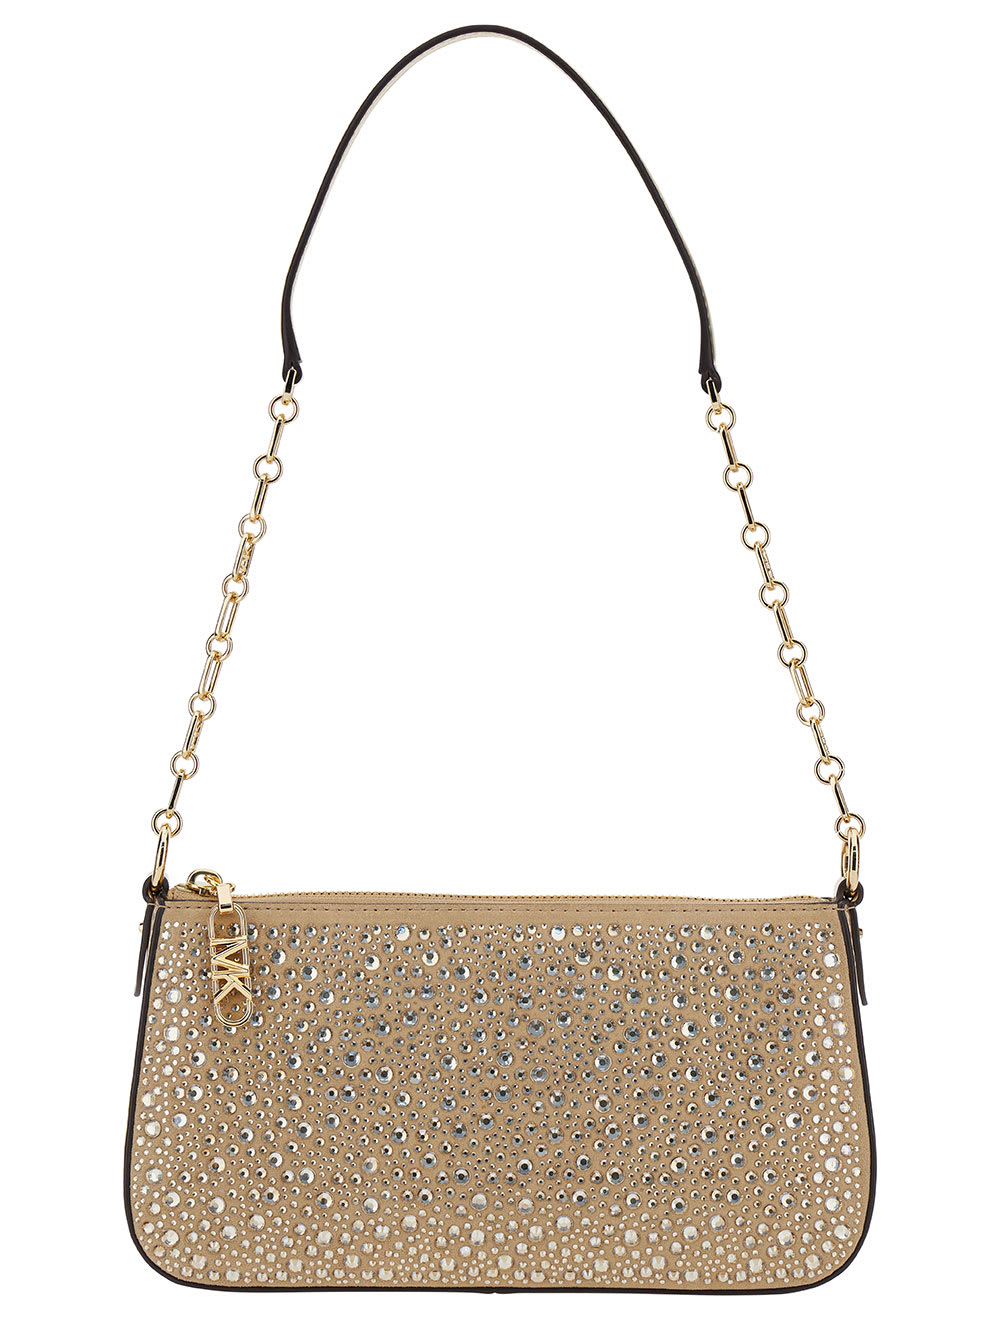 MICHAEL MICHAEL KORS BEIGE SHOULDER BAG WITH ALL-OVER RHINESTONE IN SUEDE WOMAN